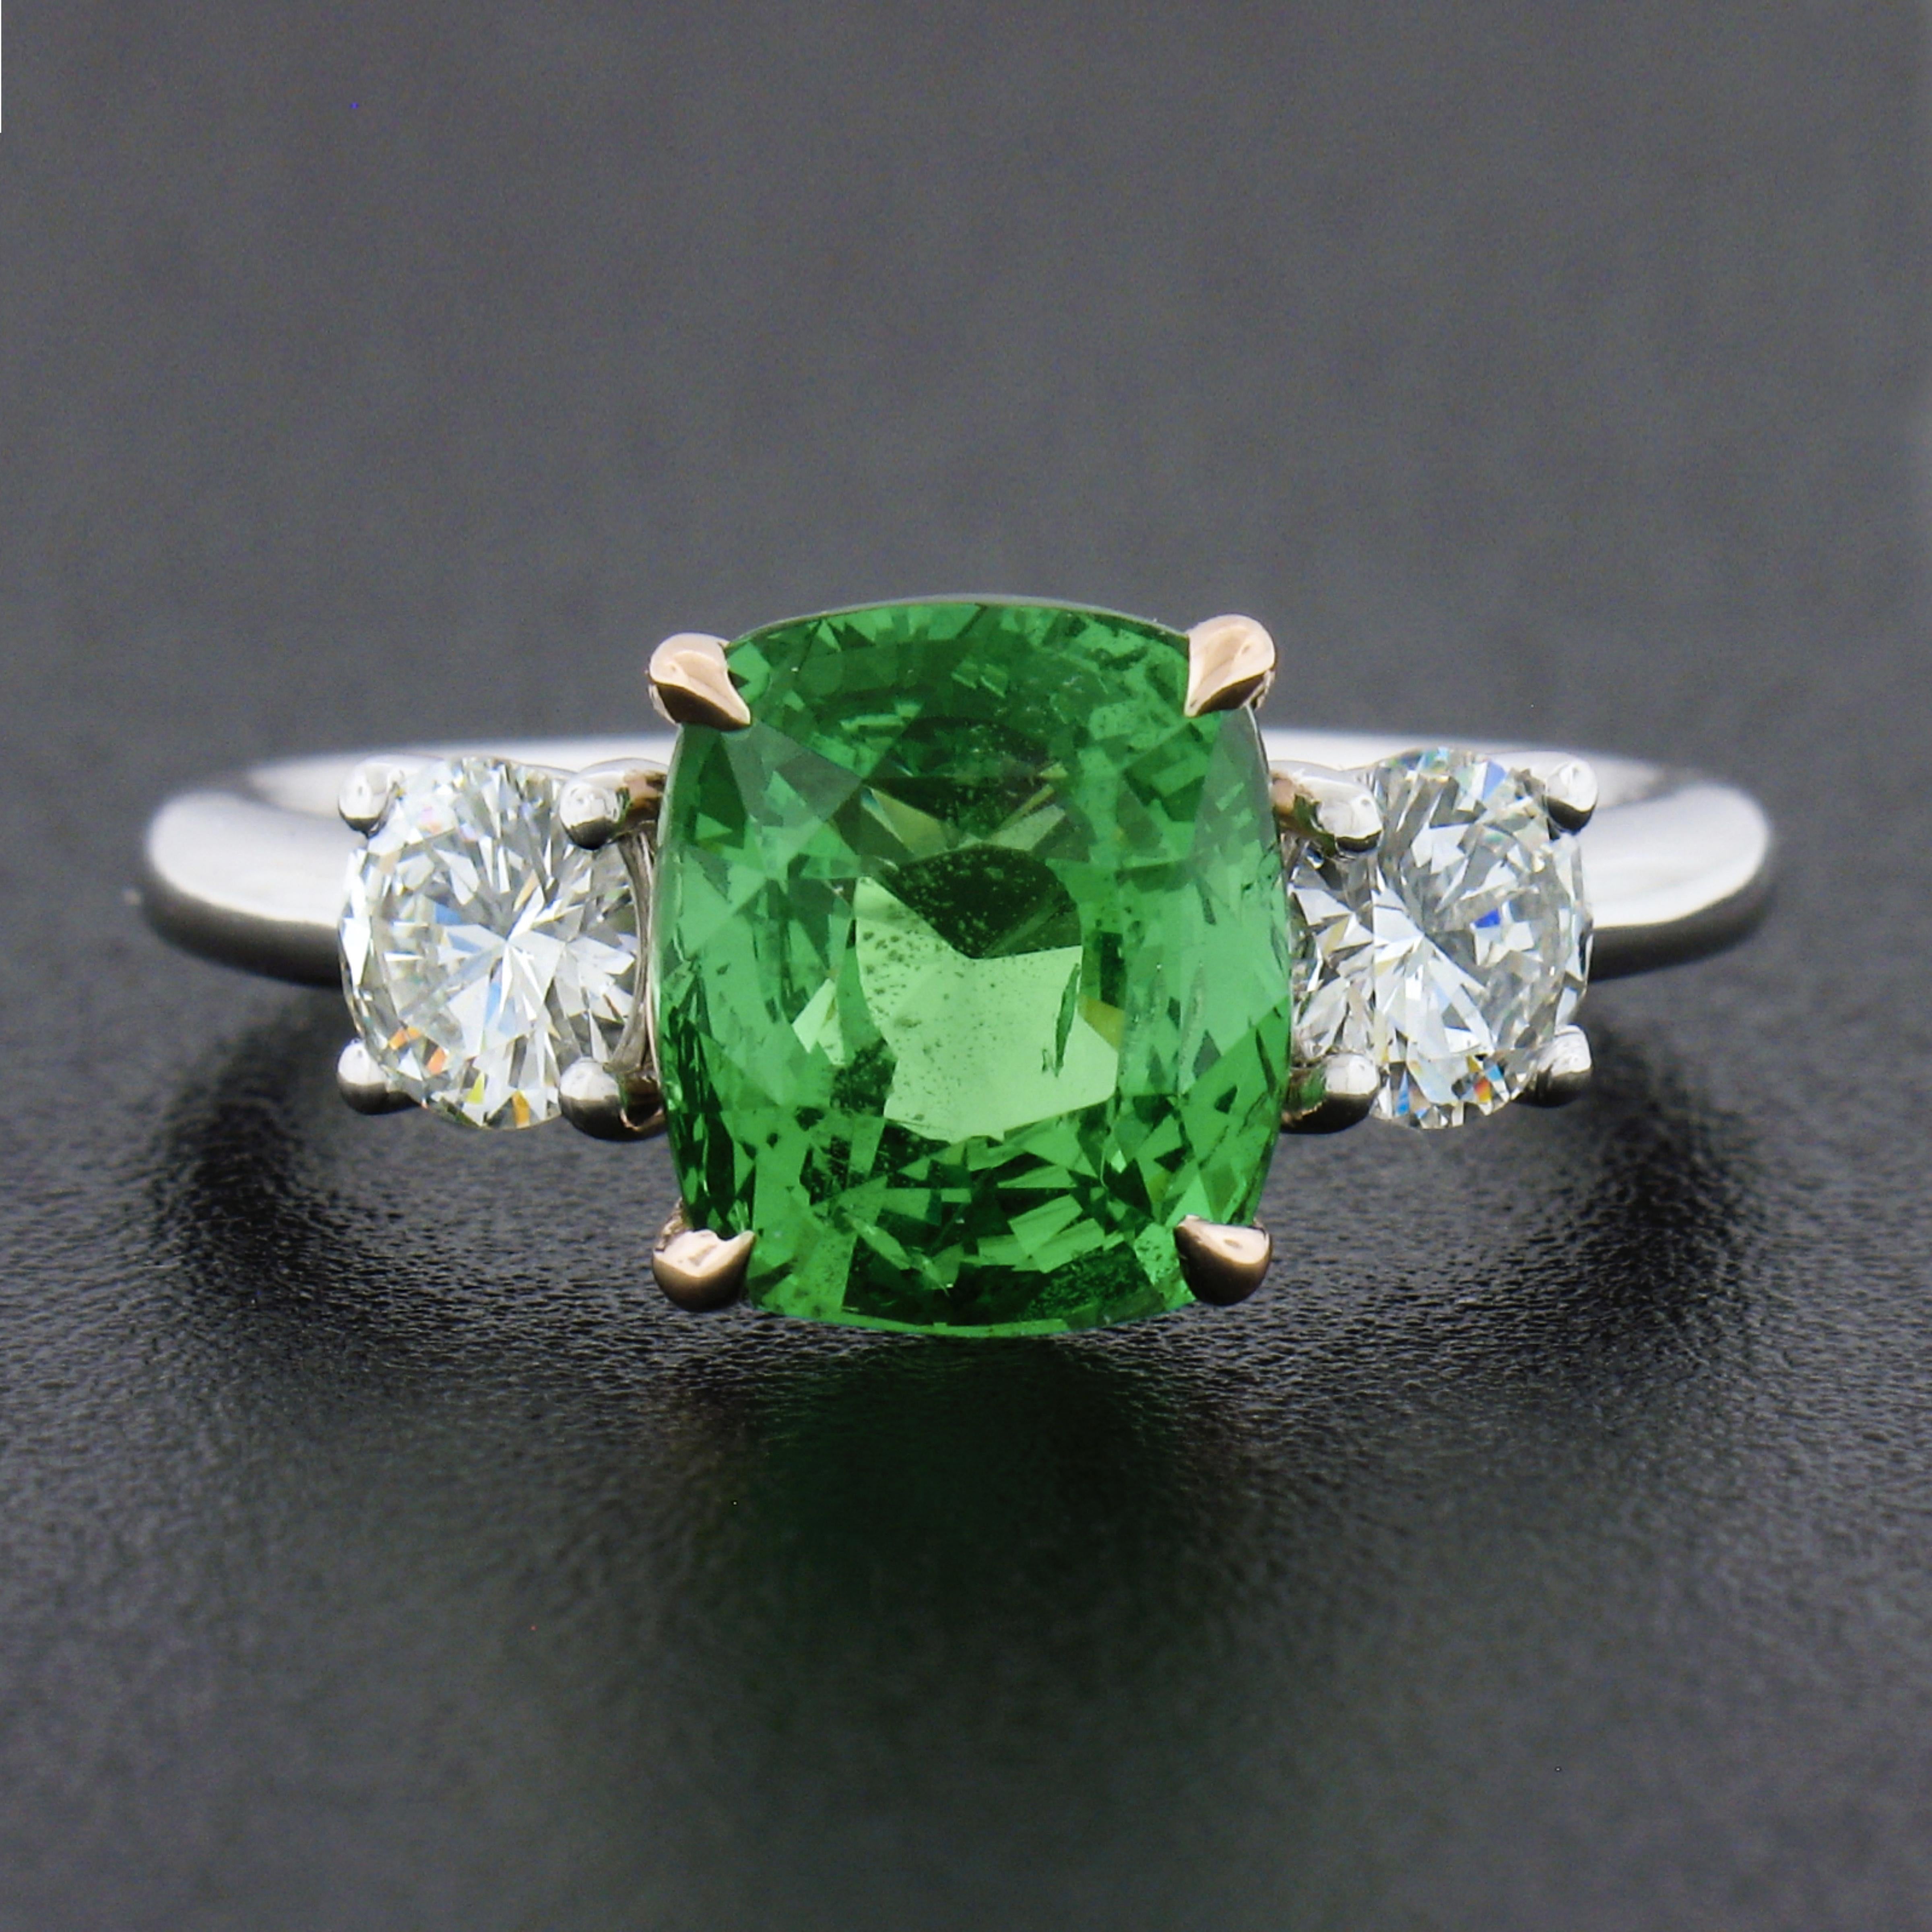 Here we have a fancy, and truly magnificent green tsavorite and diamond cocktail ring newly crafted in solid platinum with a solid 14k rose gold center basket setting. The ring features a natural, GIA certified, cushion cut green tsavorite that